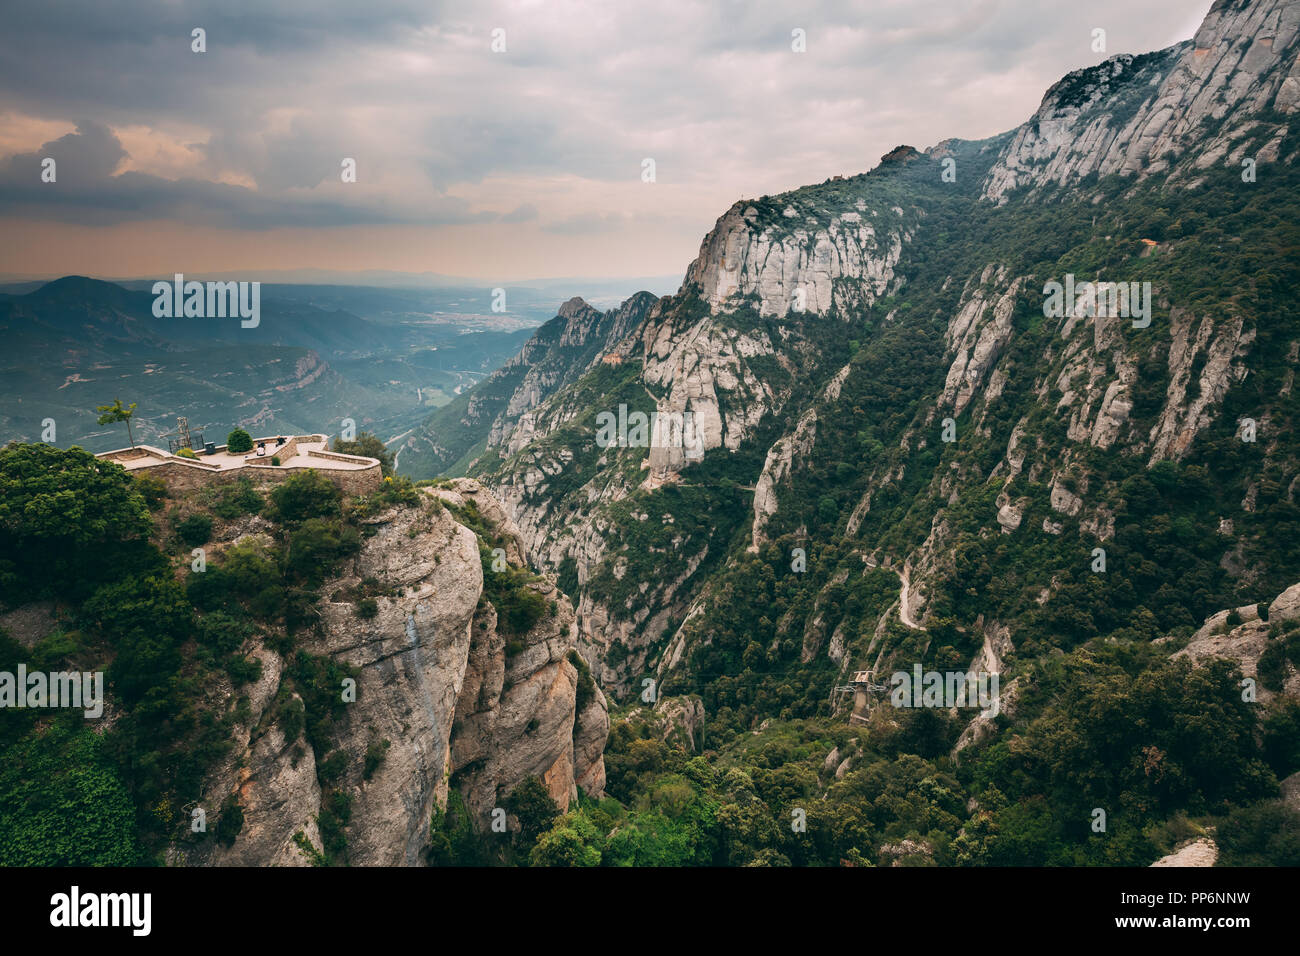 Catalonia, Spain. Viewpoint In Montserrat Mountains. Rocky Range Located Near City Of Barcelona, Spain. It Is Part Of The Catalan Pre-coastal Range. Stock Photo